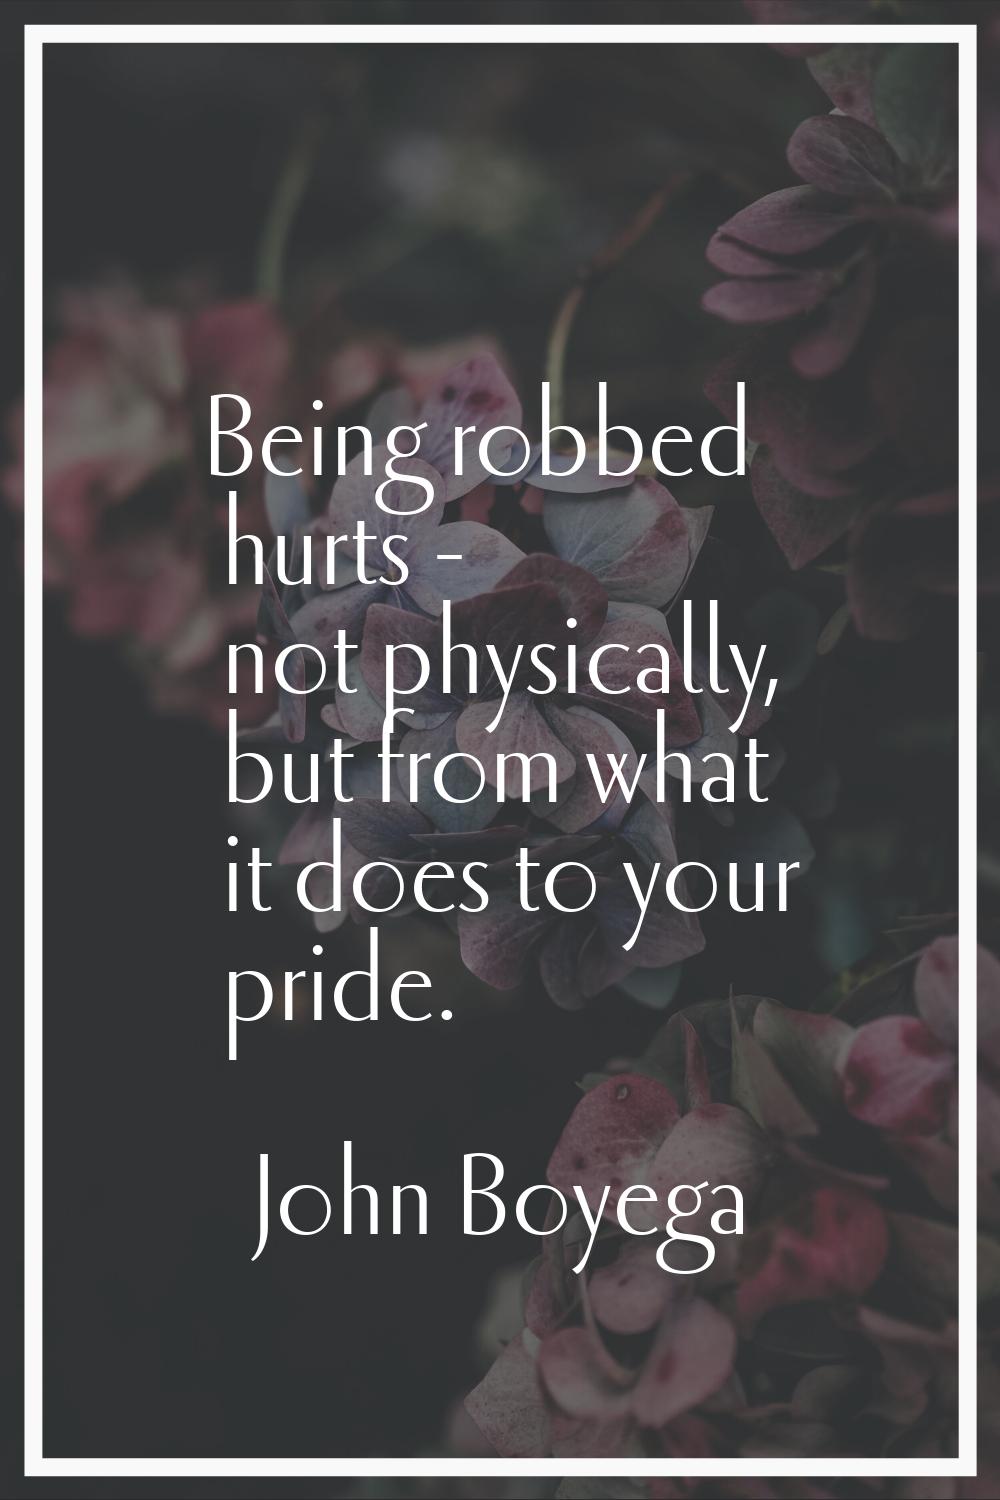 Being robbed hurts - not physically, but from what it does to your pride.